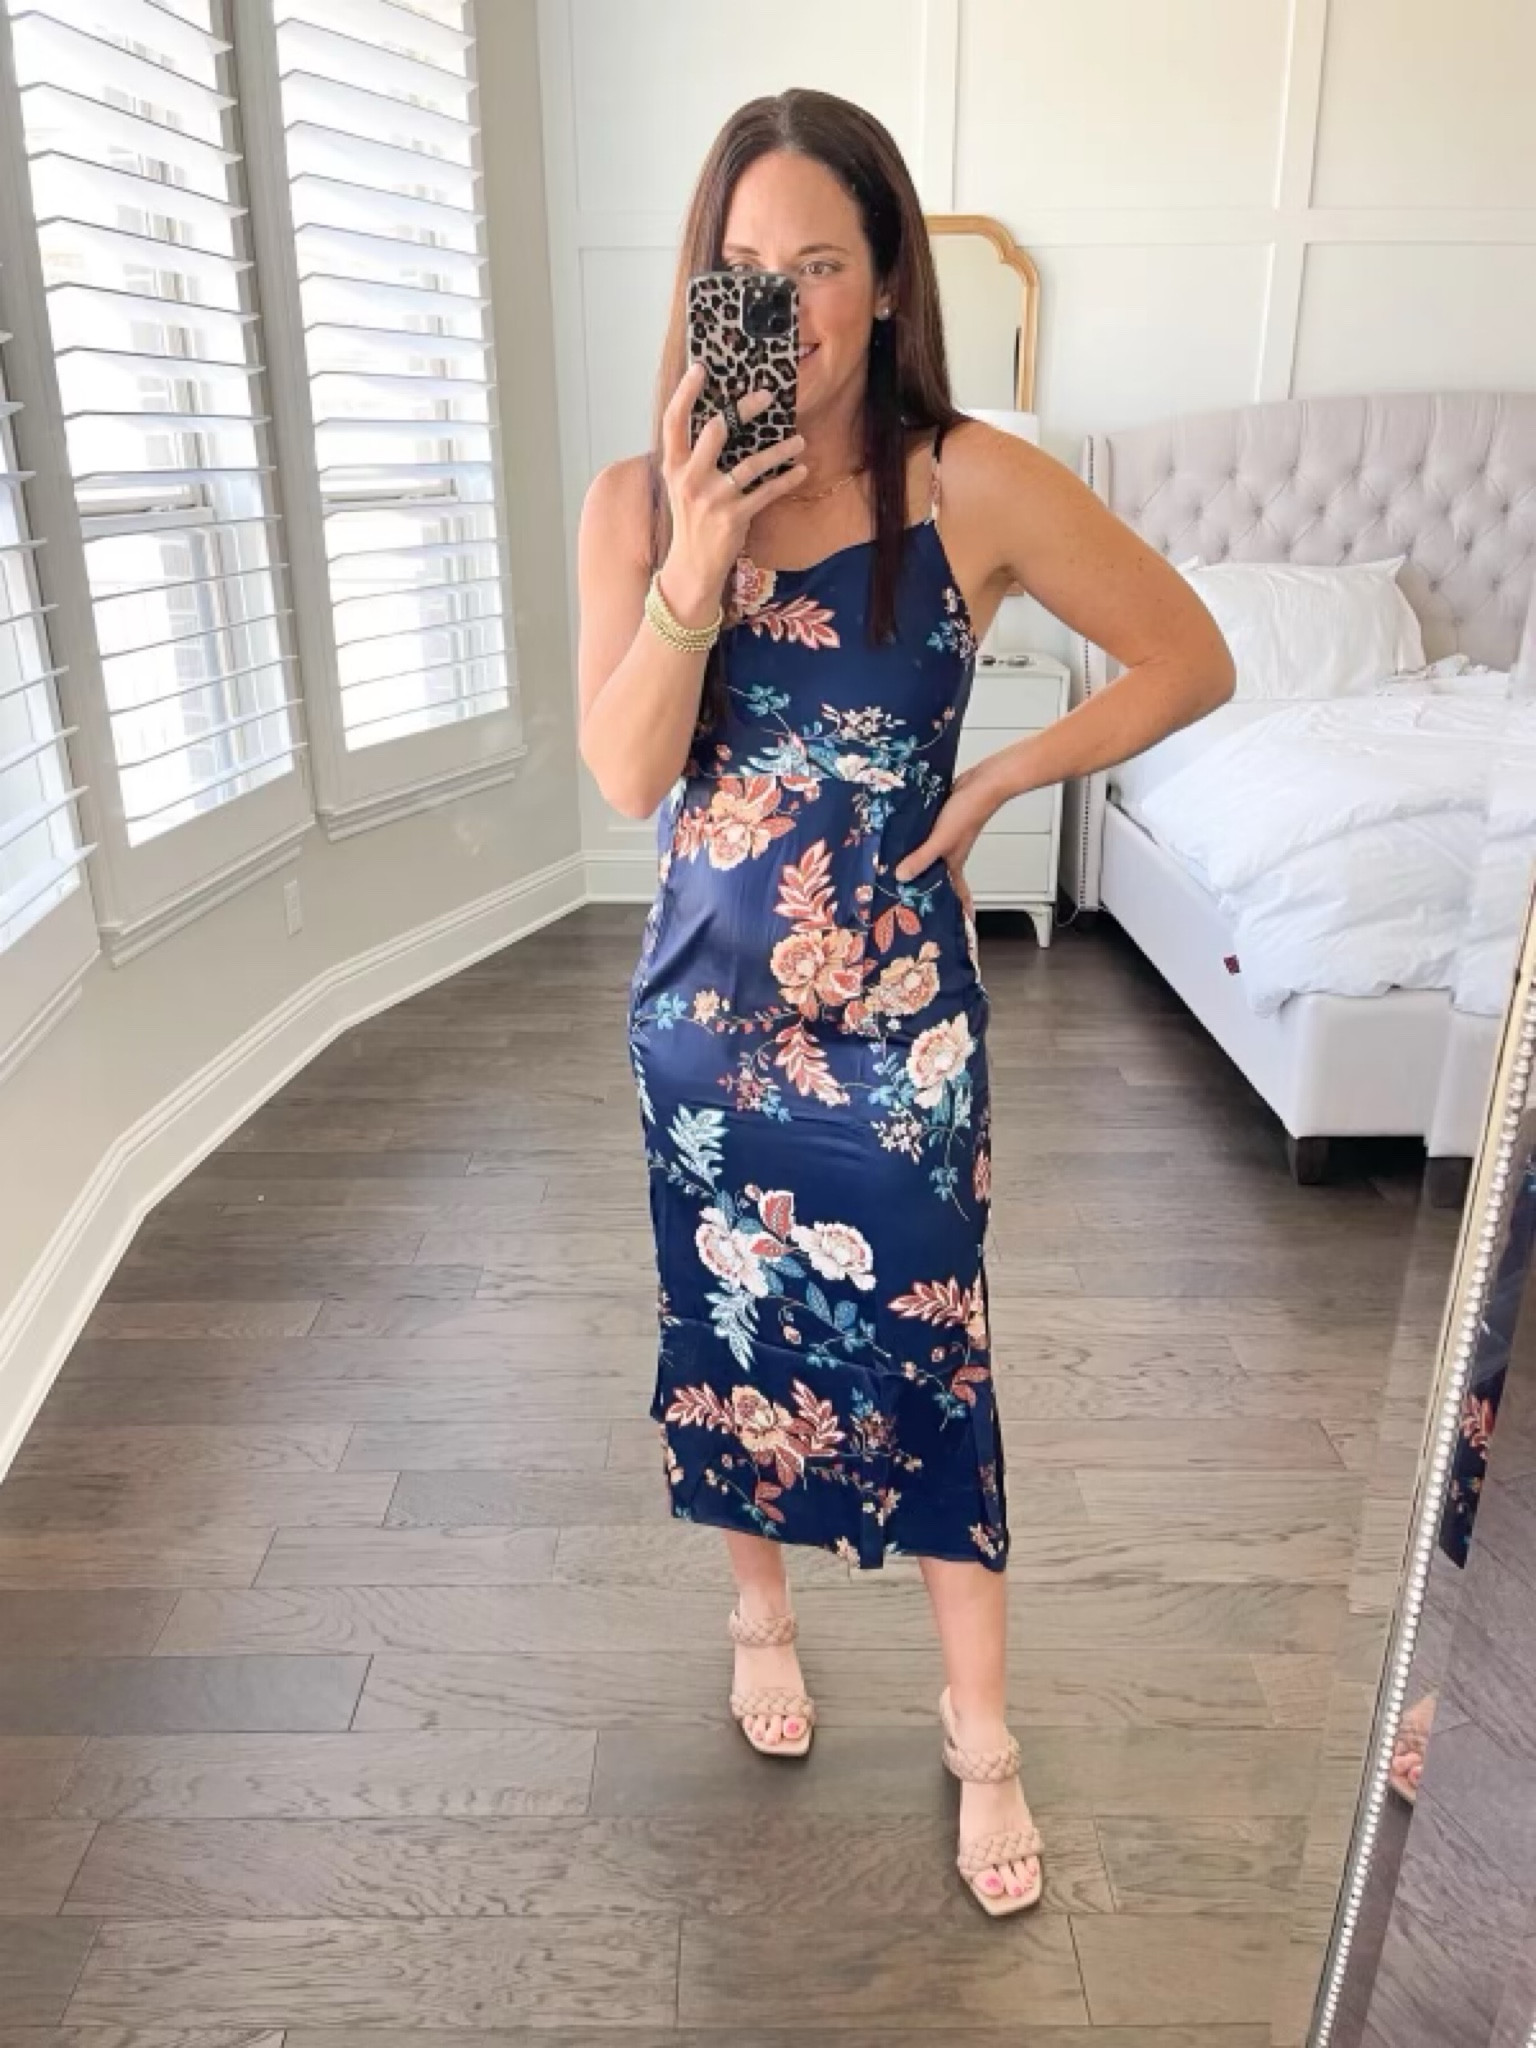 casey mallet recommends Milf In Summer Dress